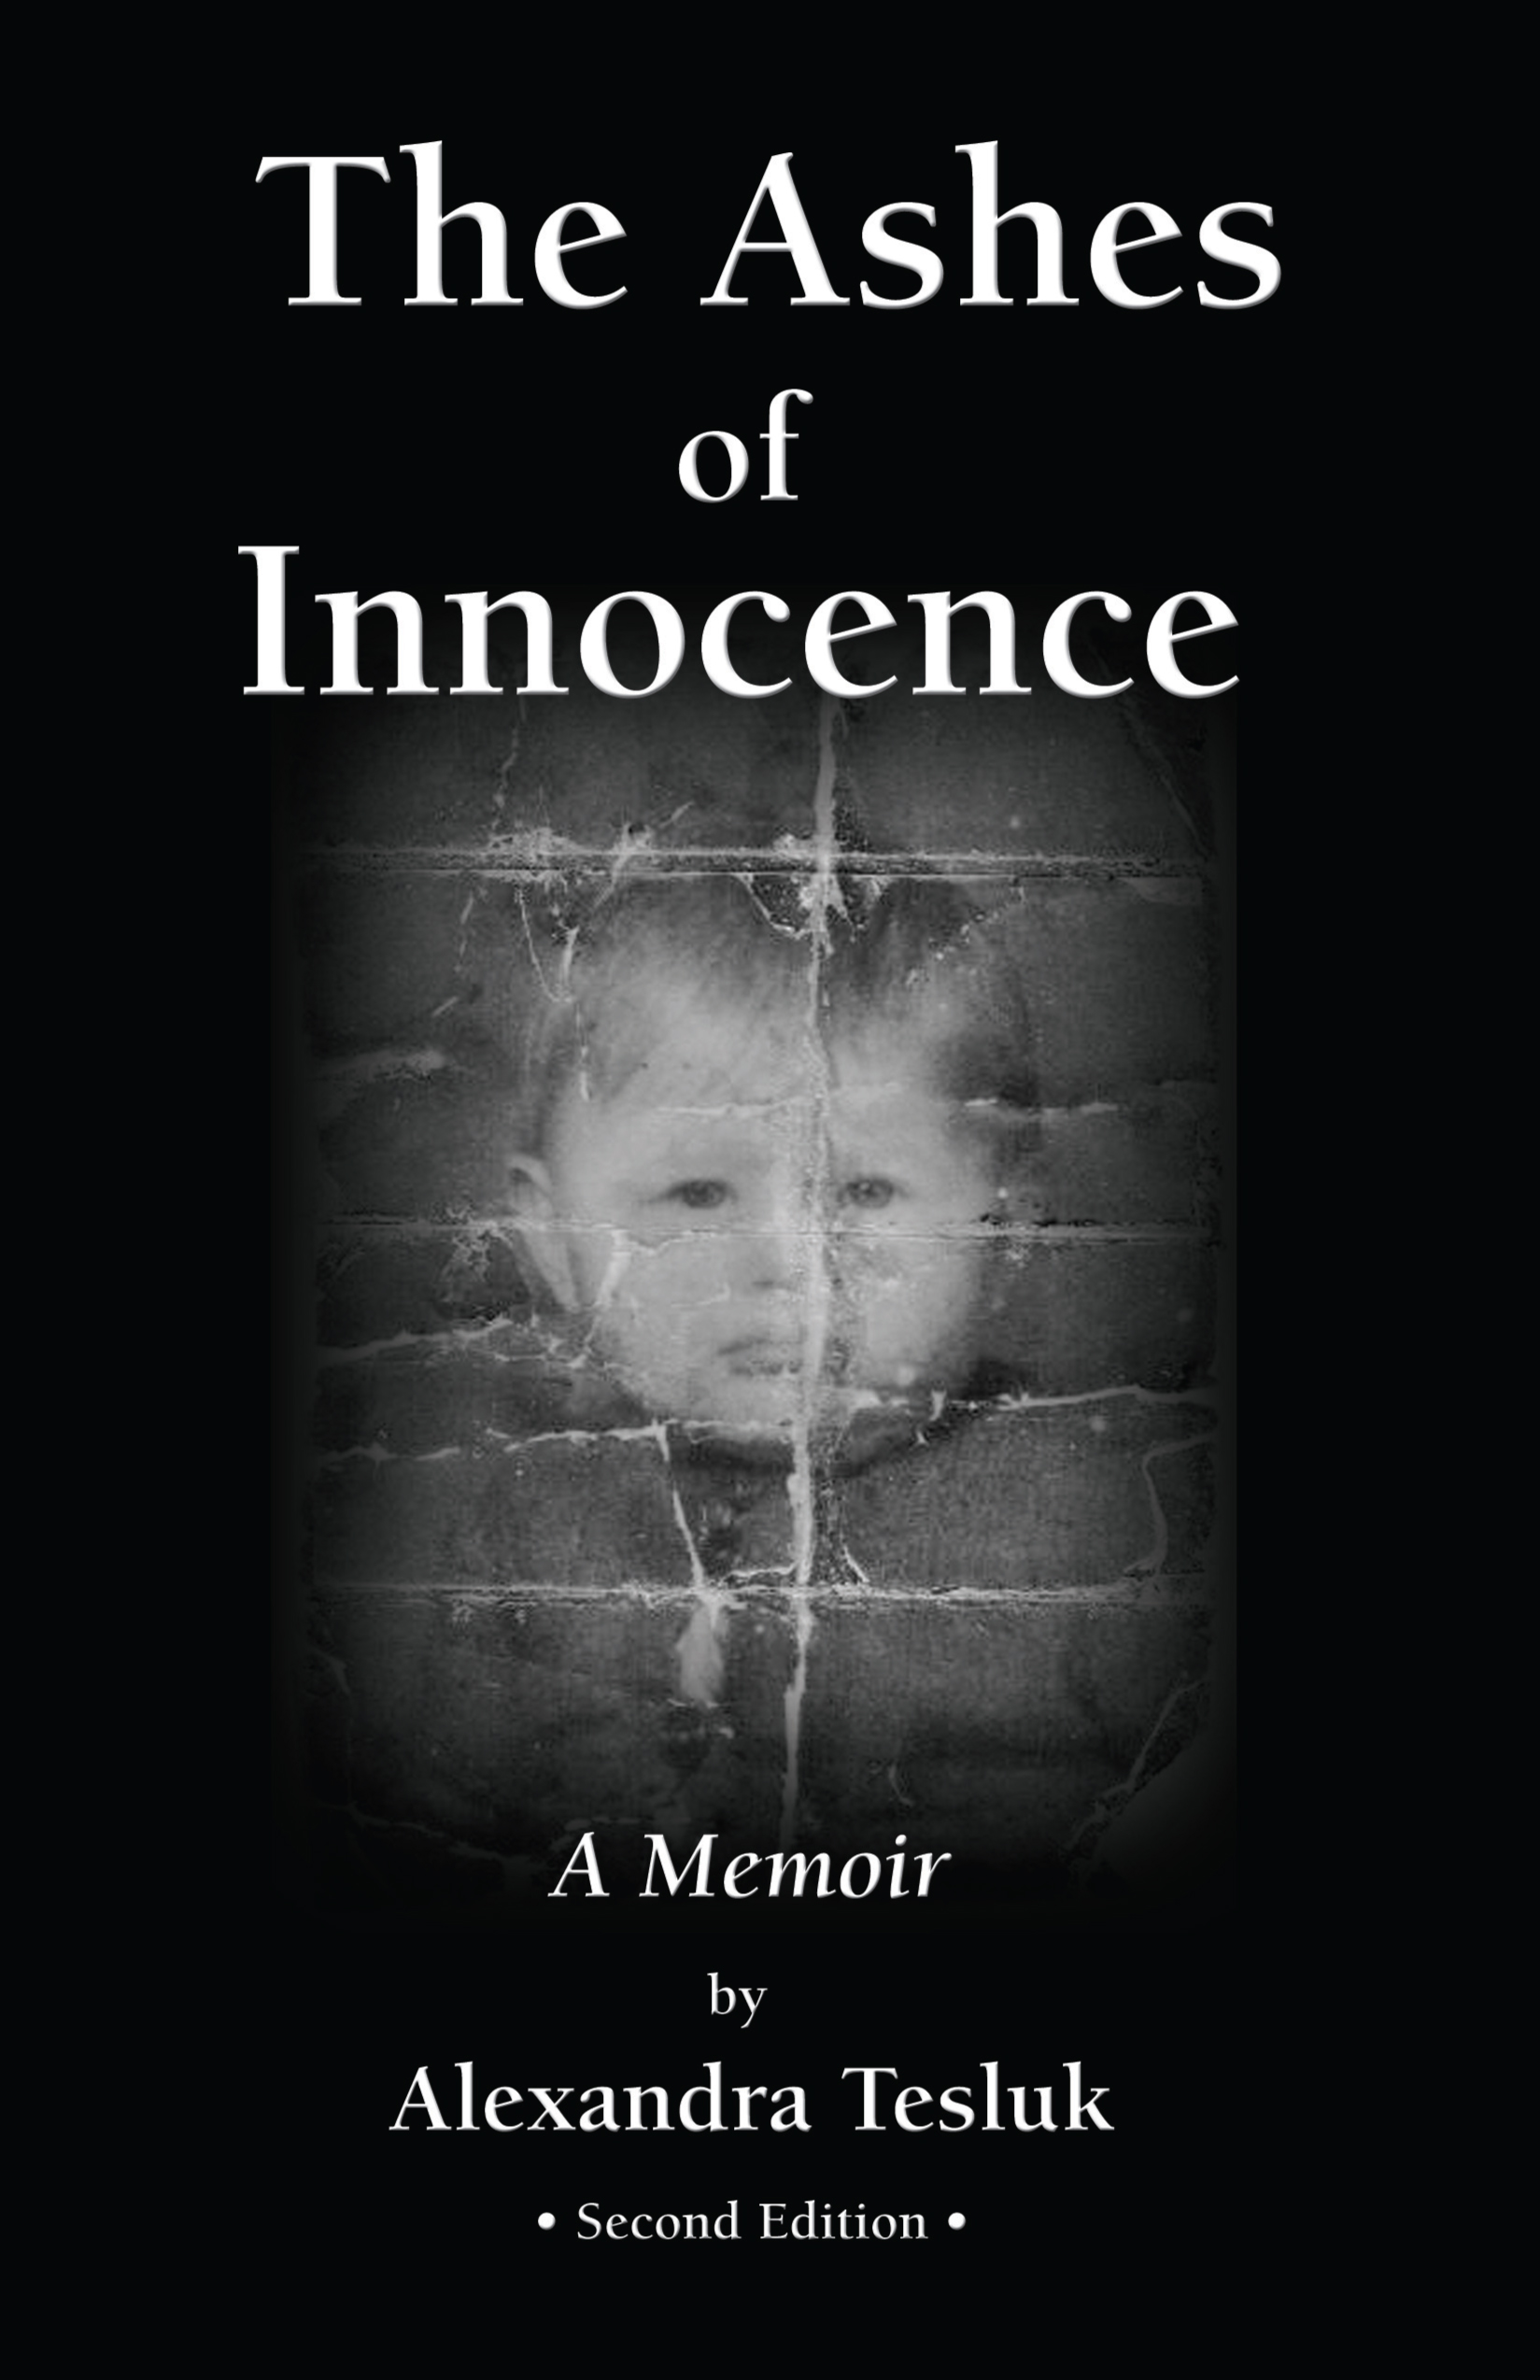 The Ashes of Innocence, Second Edition